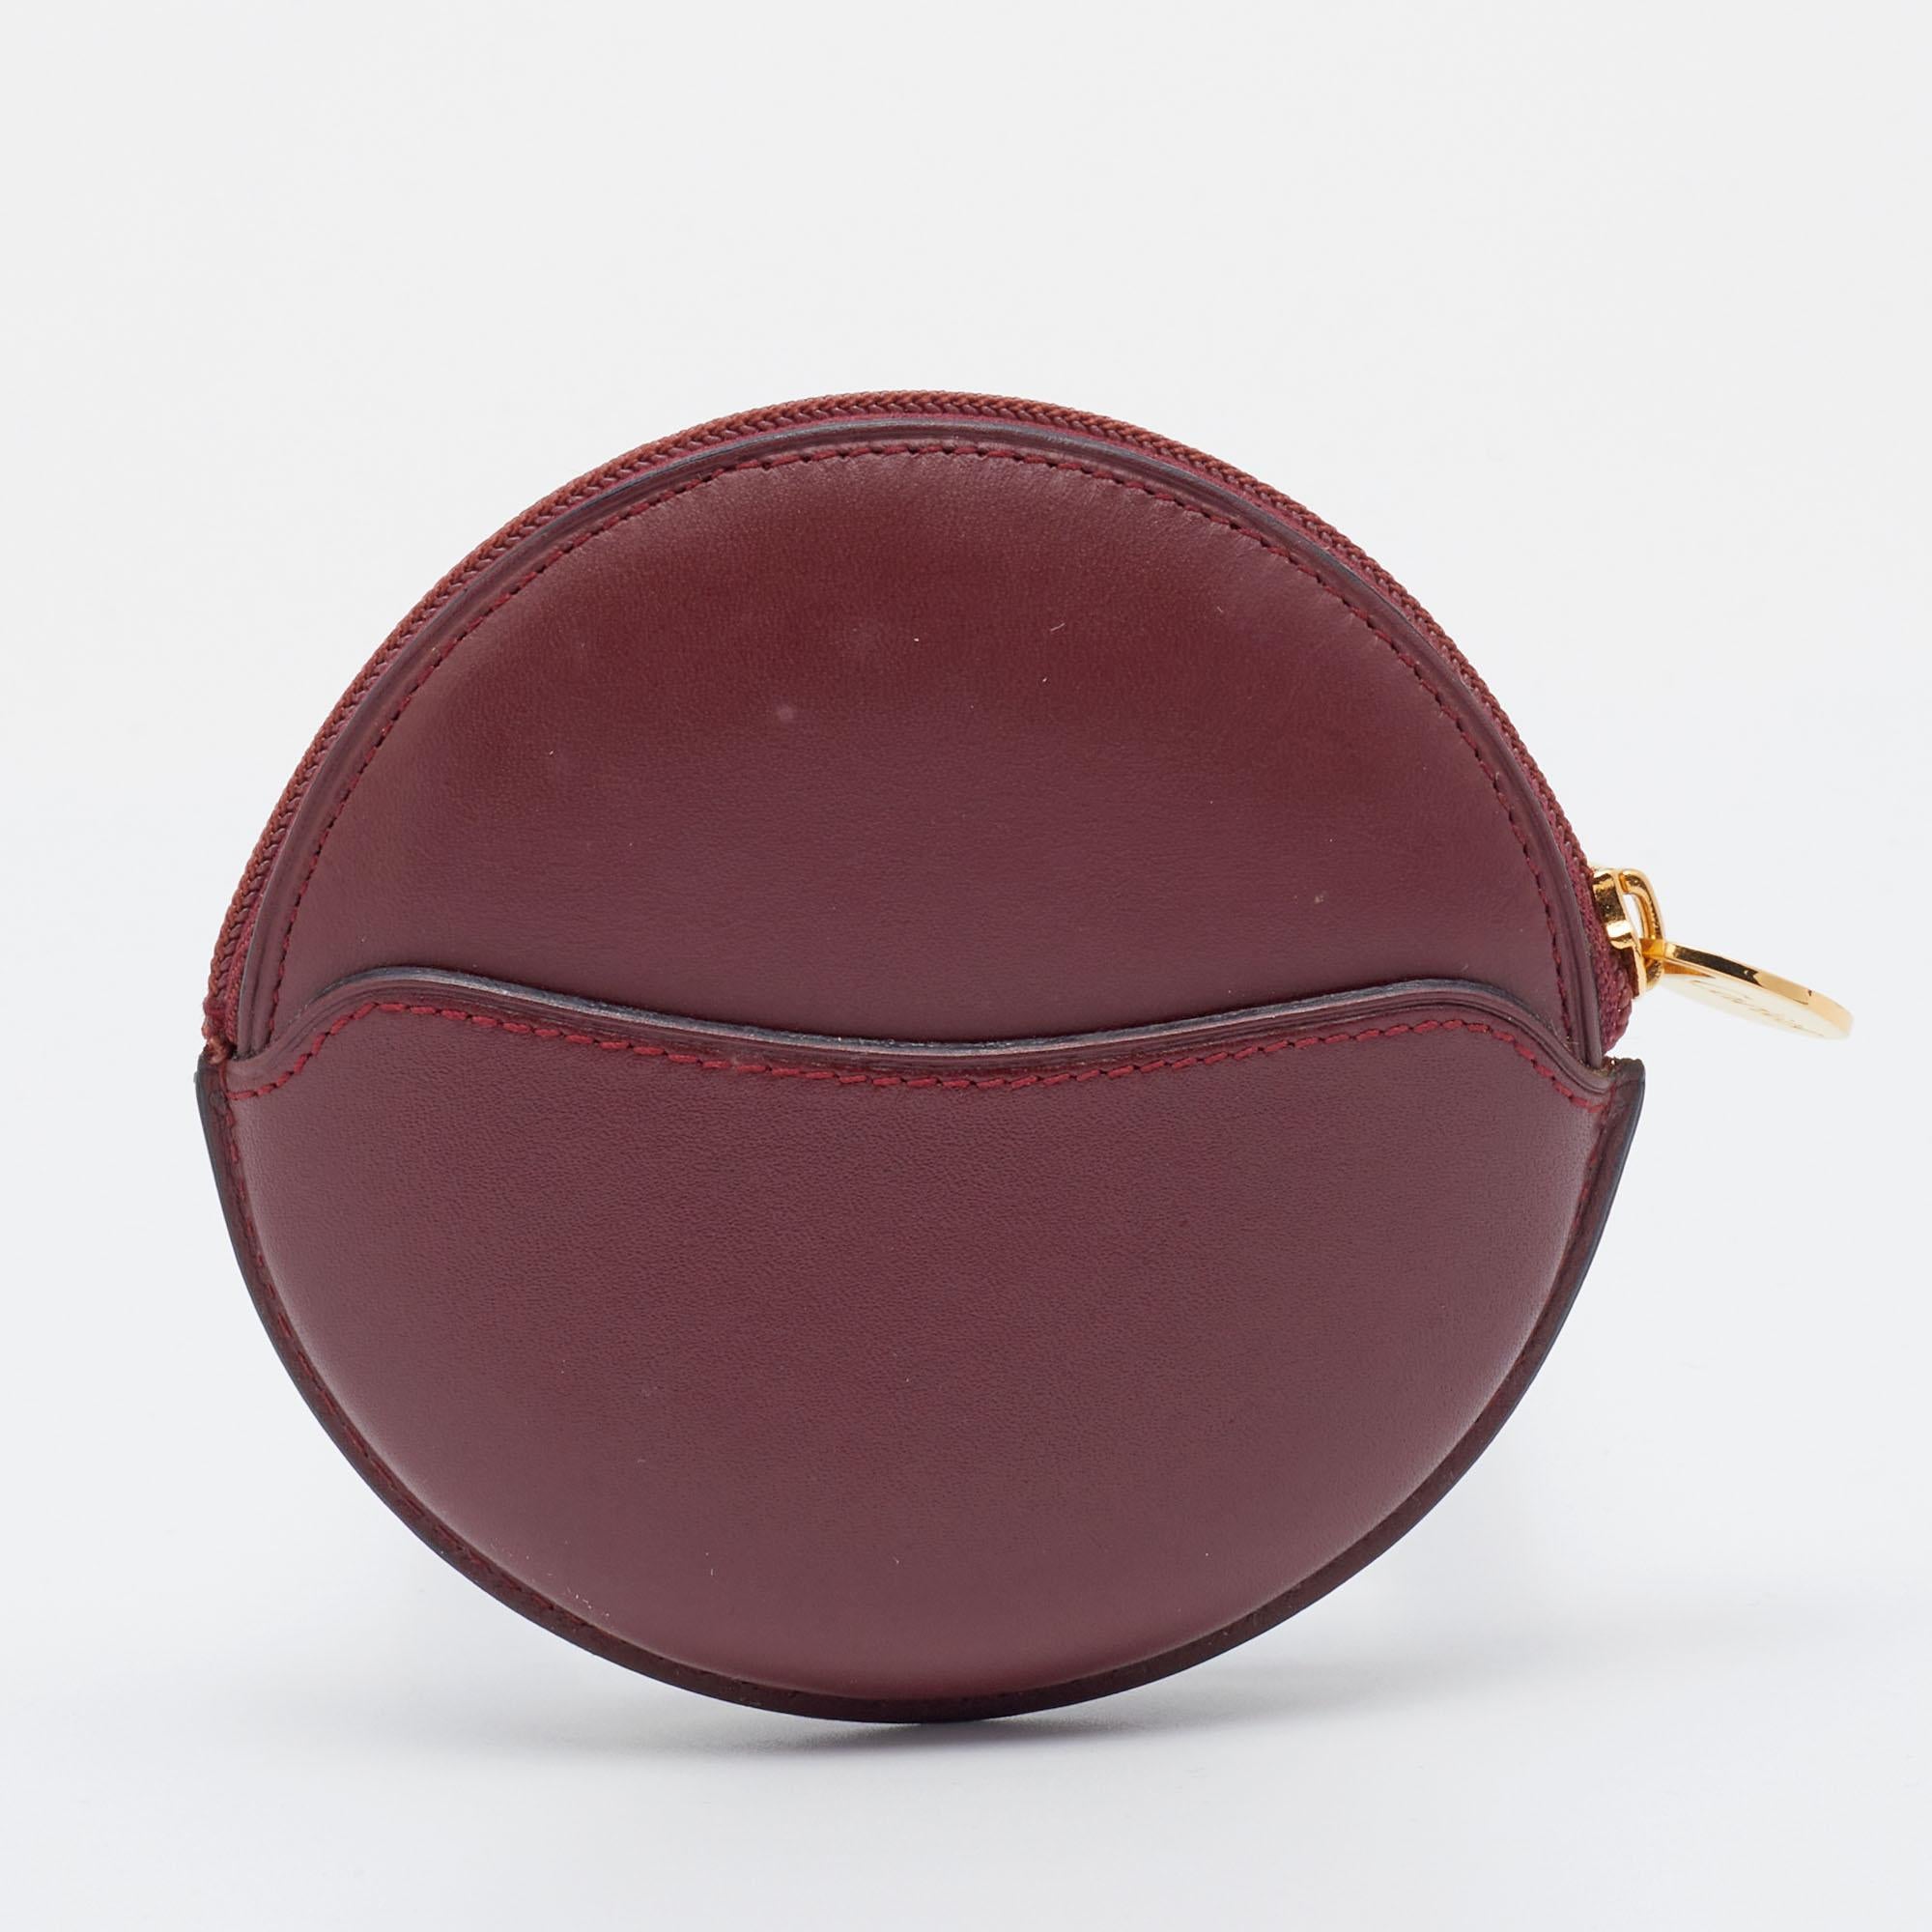 Designed into a round silhouette, this Cartier coin purse is a reliable accessory. It is created from leather and its interior is secured with a zipper closure at the top.

